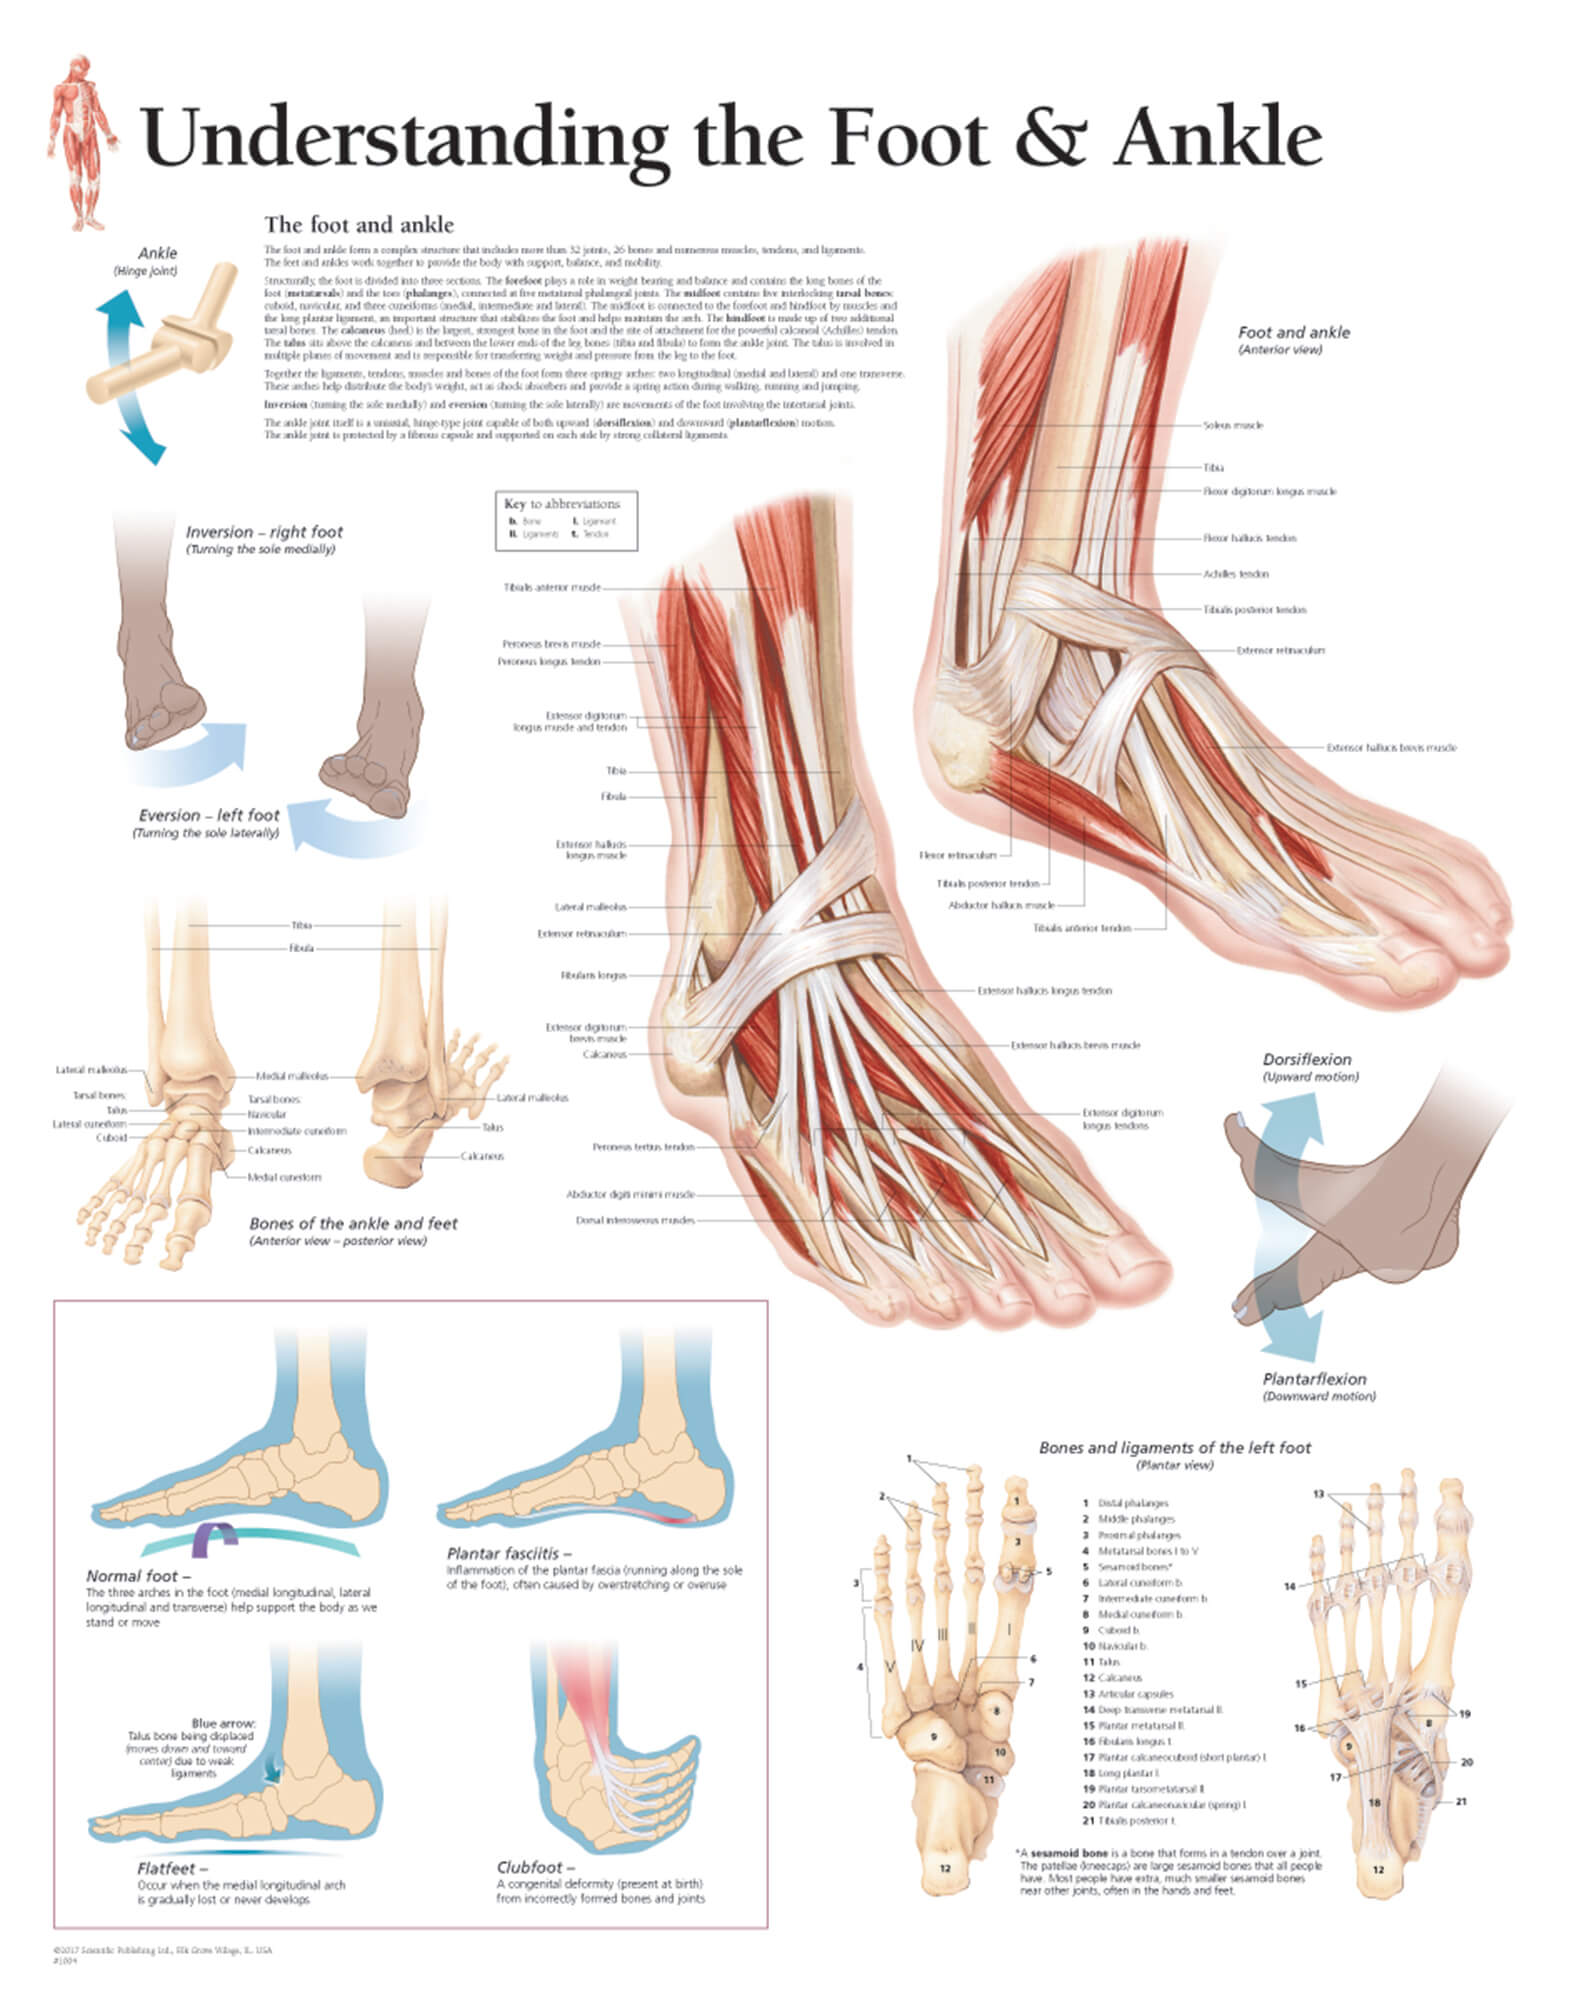 Understanding the Foot & Ankle | Scientific Publishing